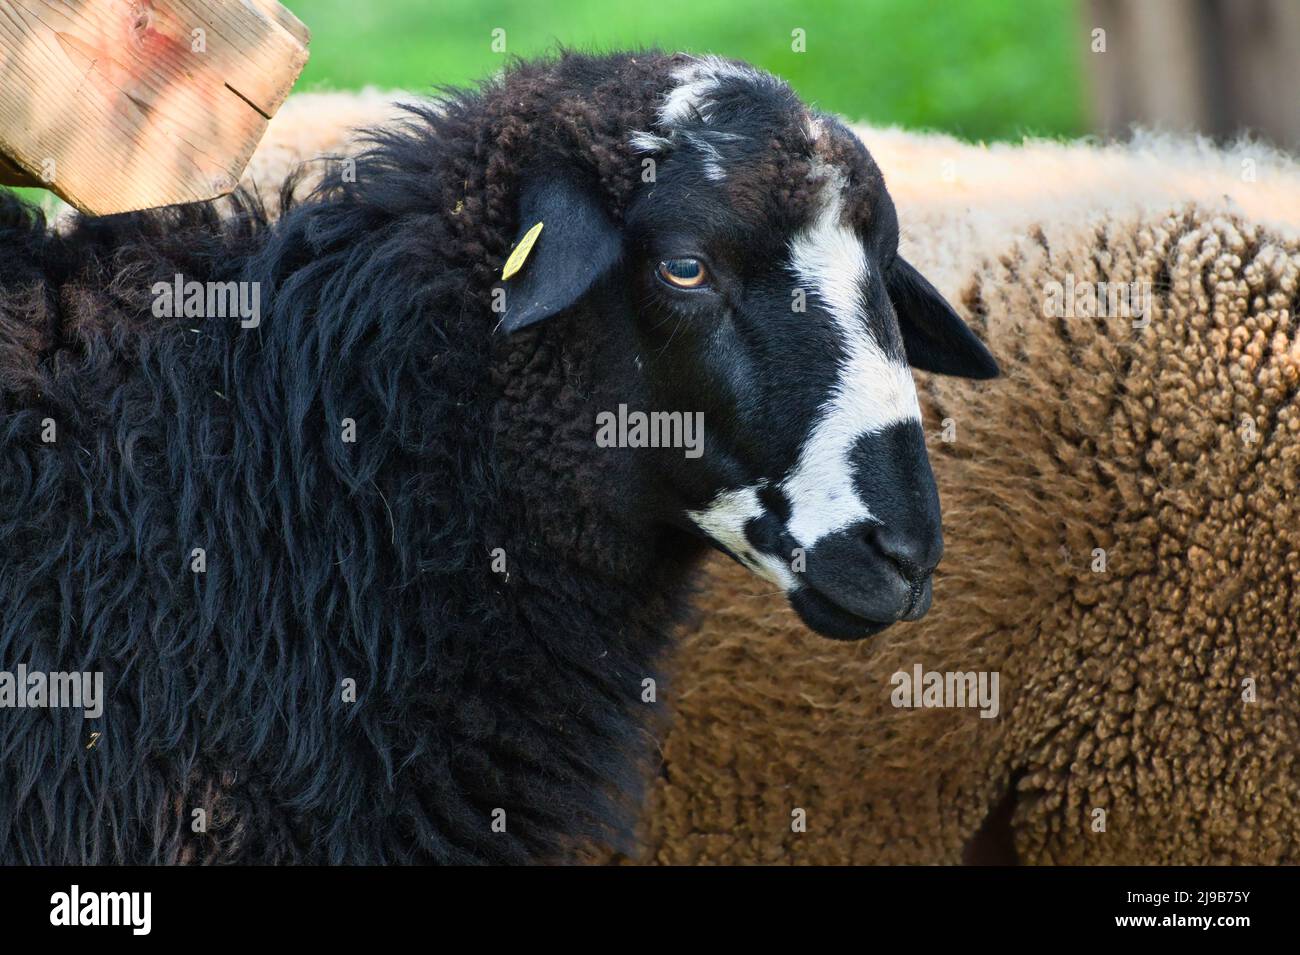 Portrait of a cute black sheep with white markings. Stock Photo